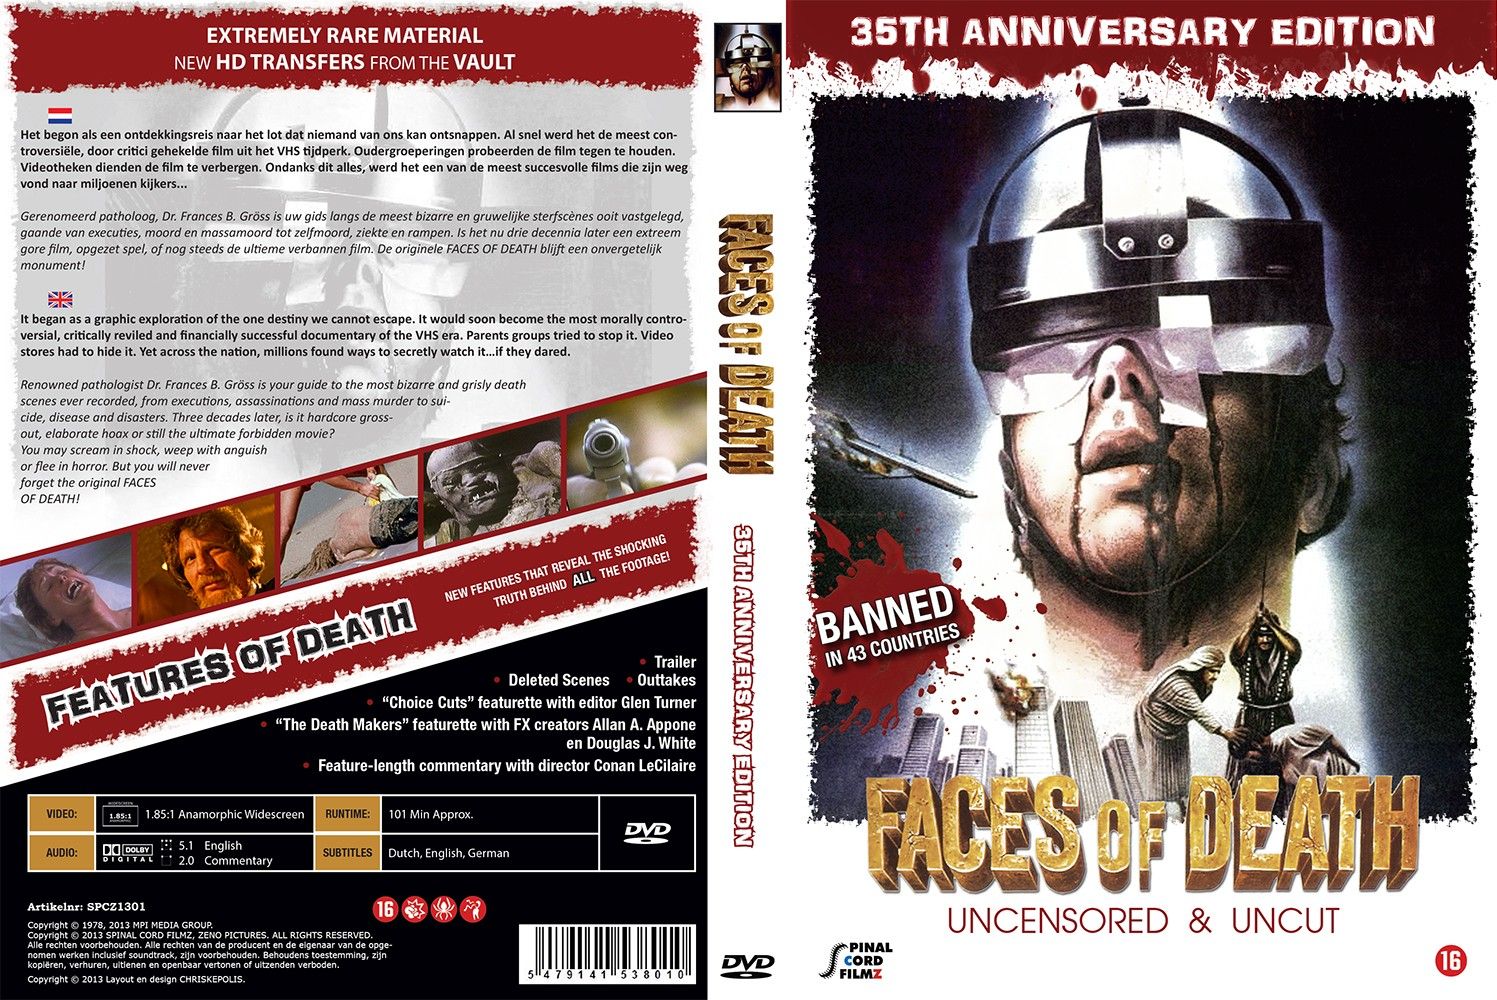 Faces of Death DVD Cover